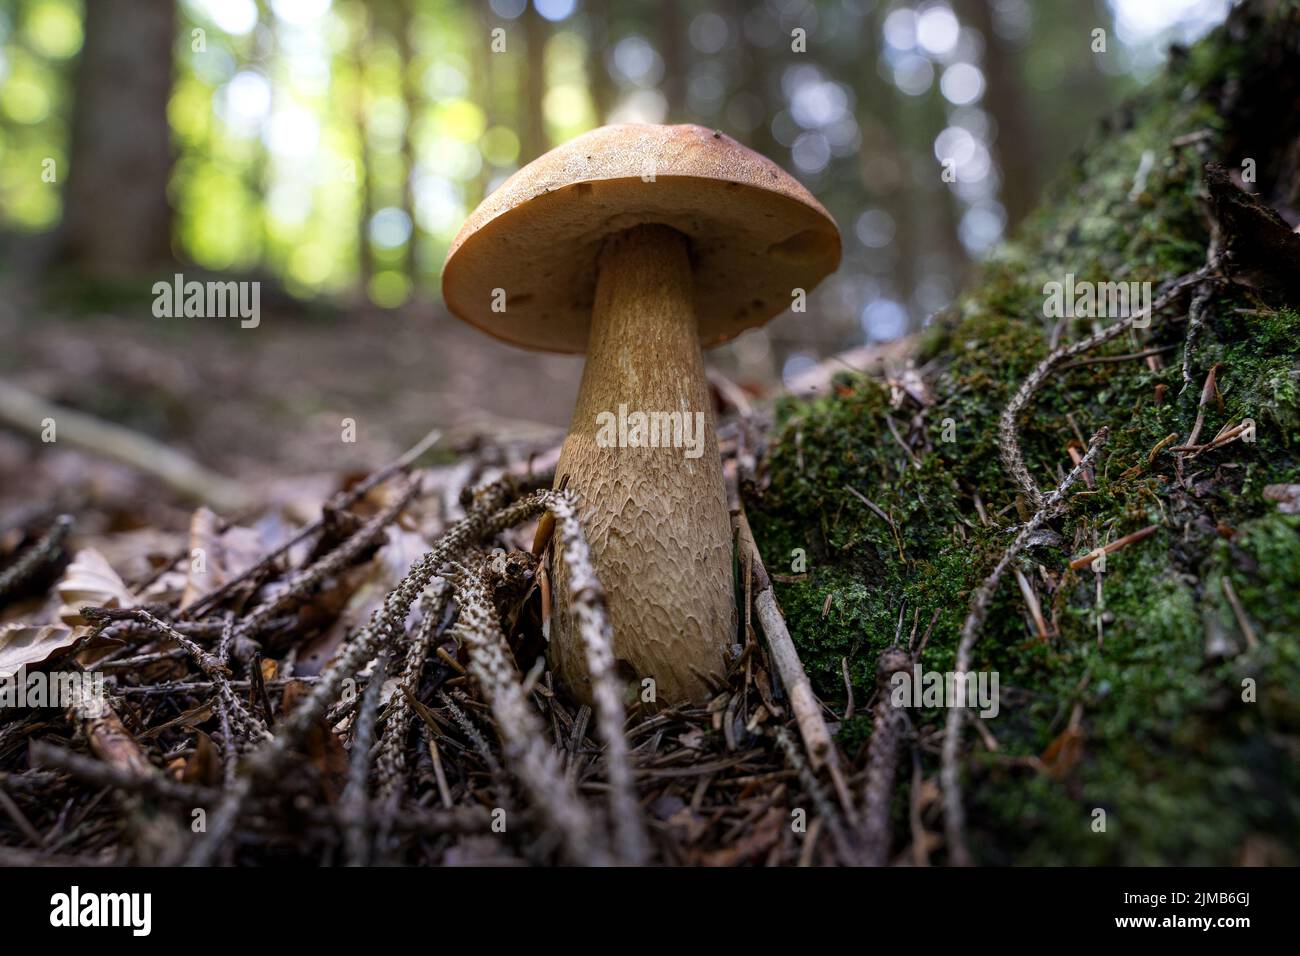 A closeup of Tylopilus felleus mushroom growing in forest surrounded by moss and dry twigs Stock Photo